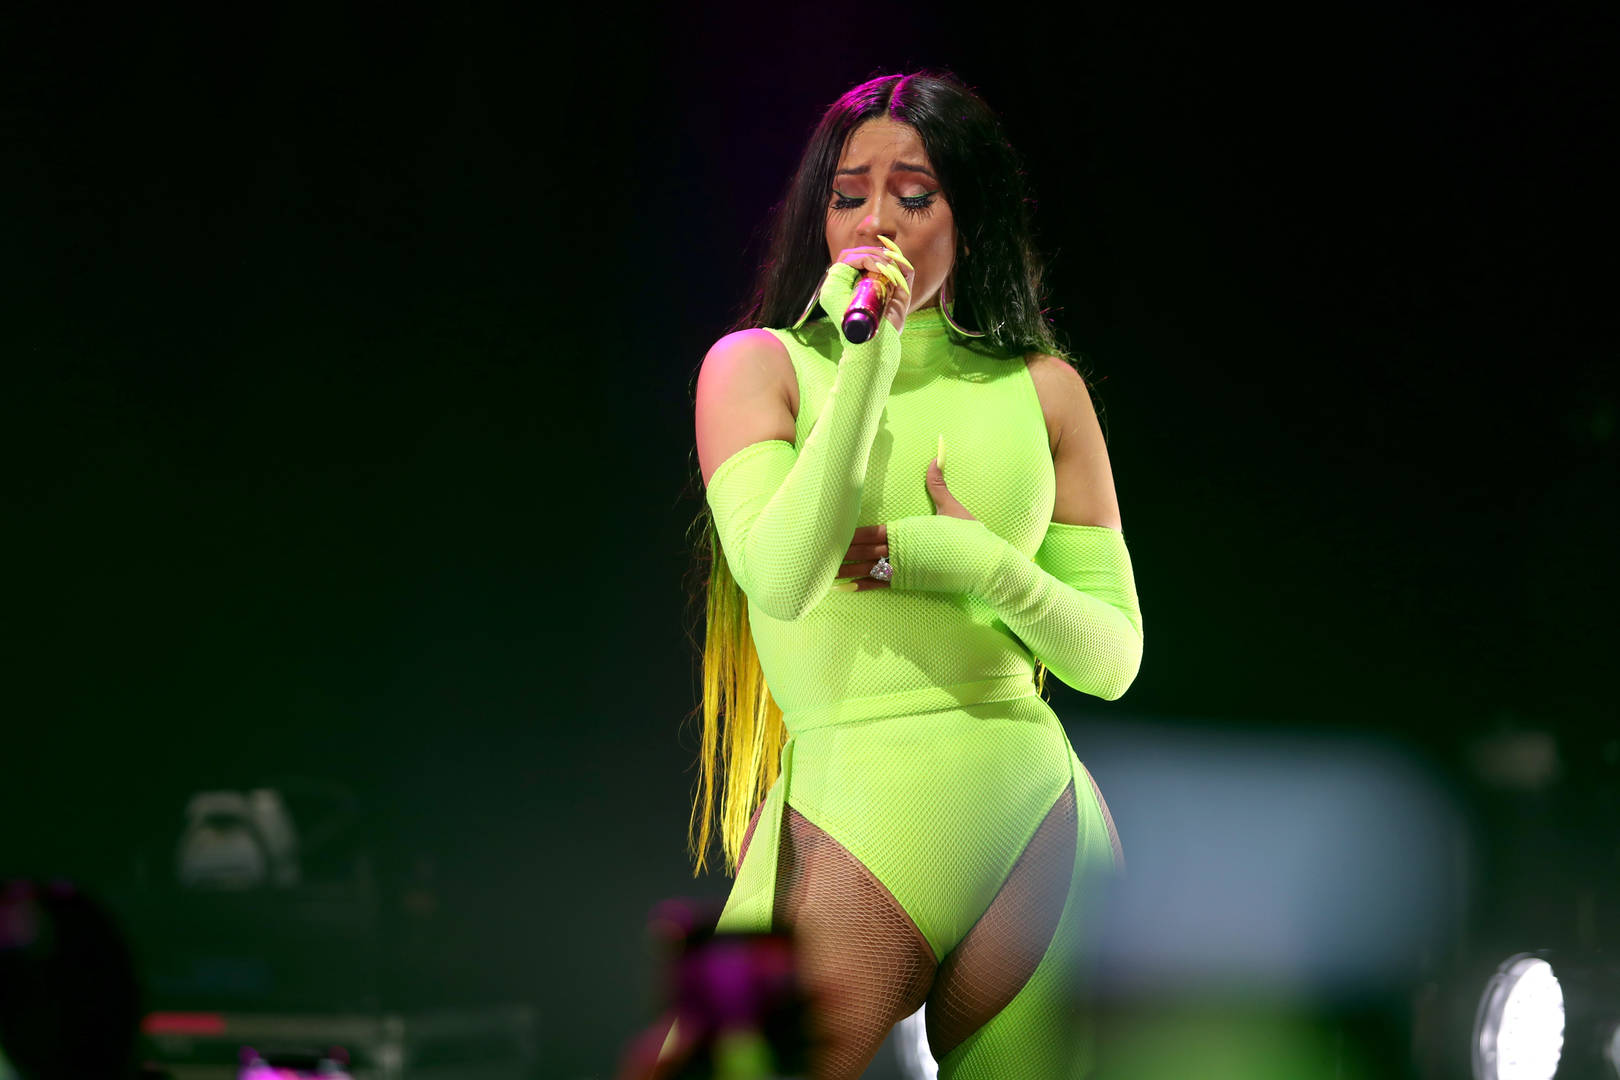 Cardi B Makes $1 Mill From Fashion Nova Collection In 24 Hours: Report 40